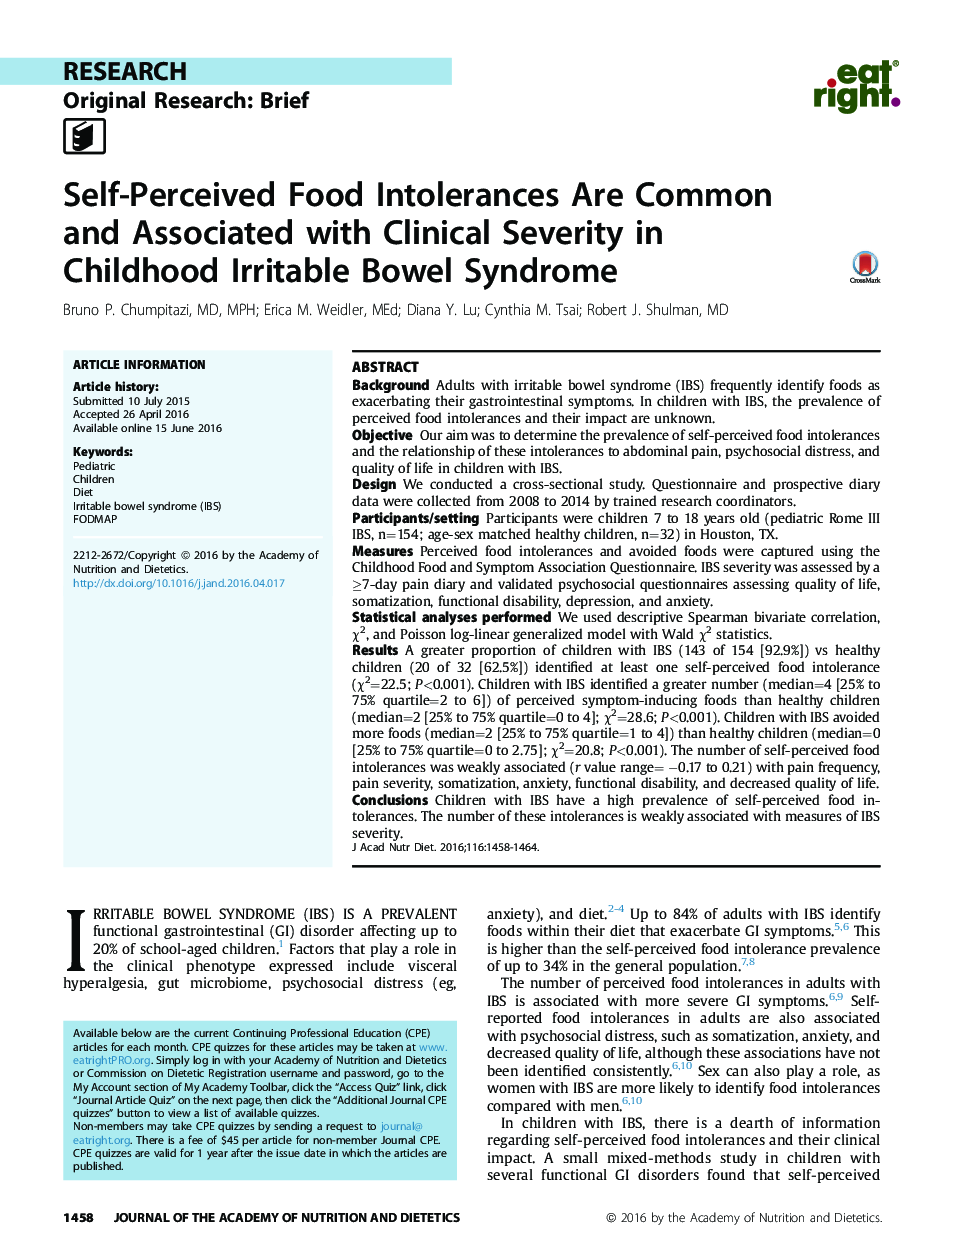 Self-Perceived Food Intolerances Are Common and Associated with Clinical Severity in Childhood Irritable Bowel Syndrome